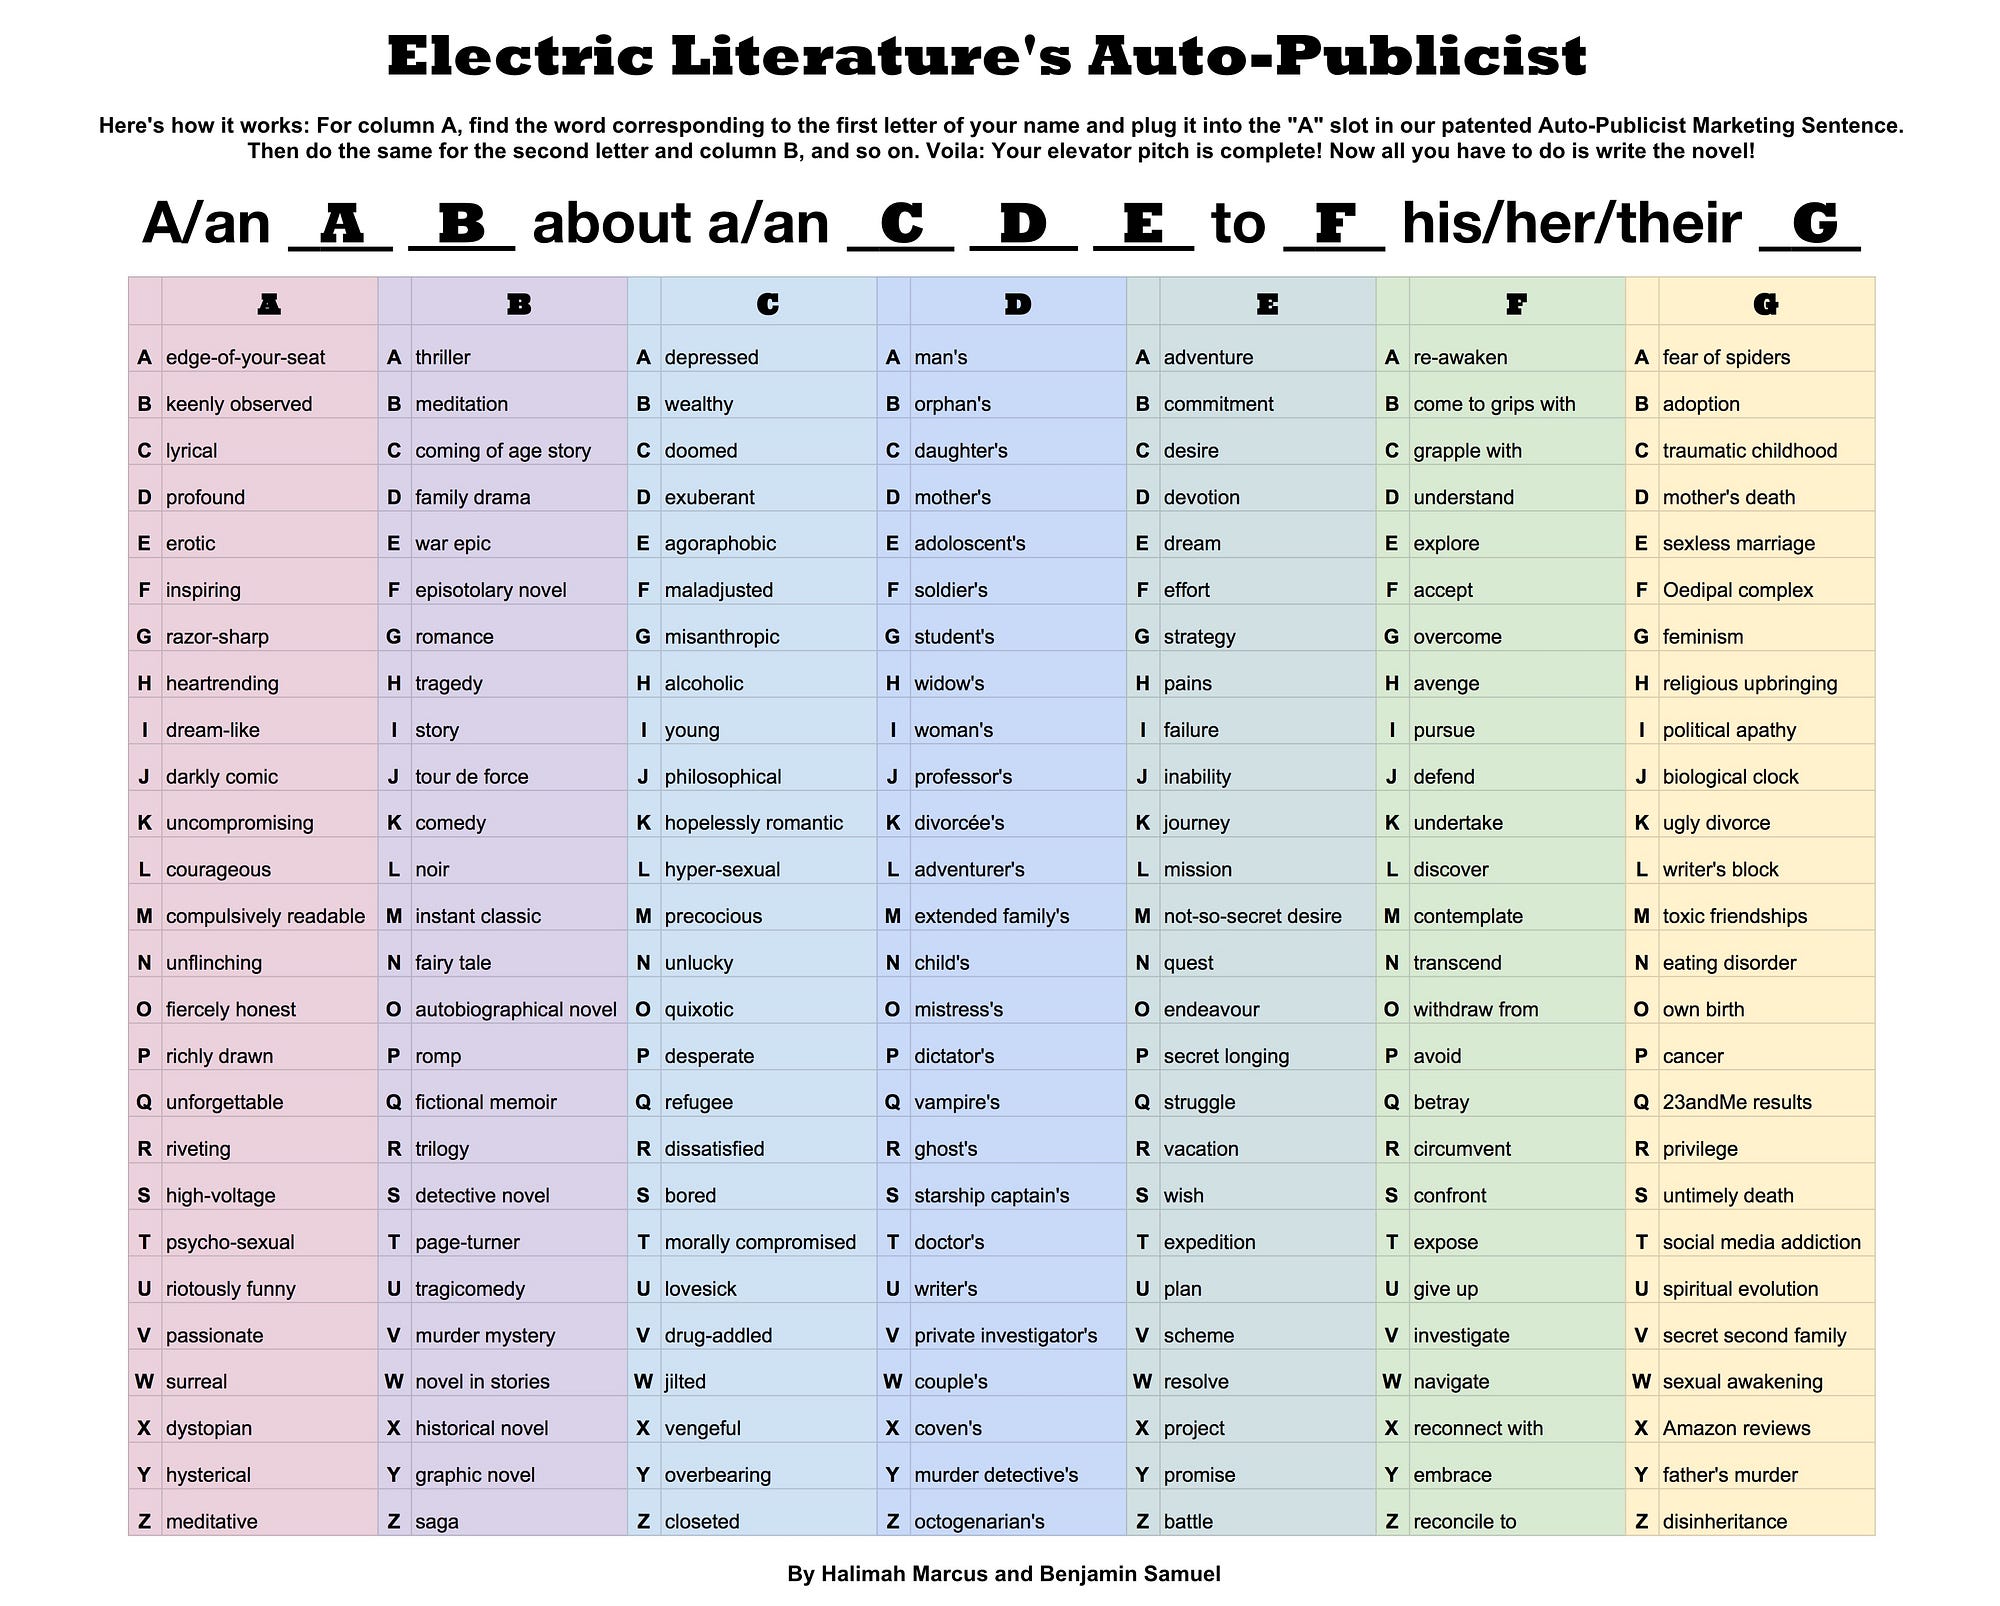 this handy chart automatically generates a pitch for your new novel